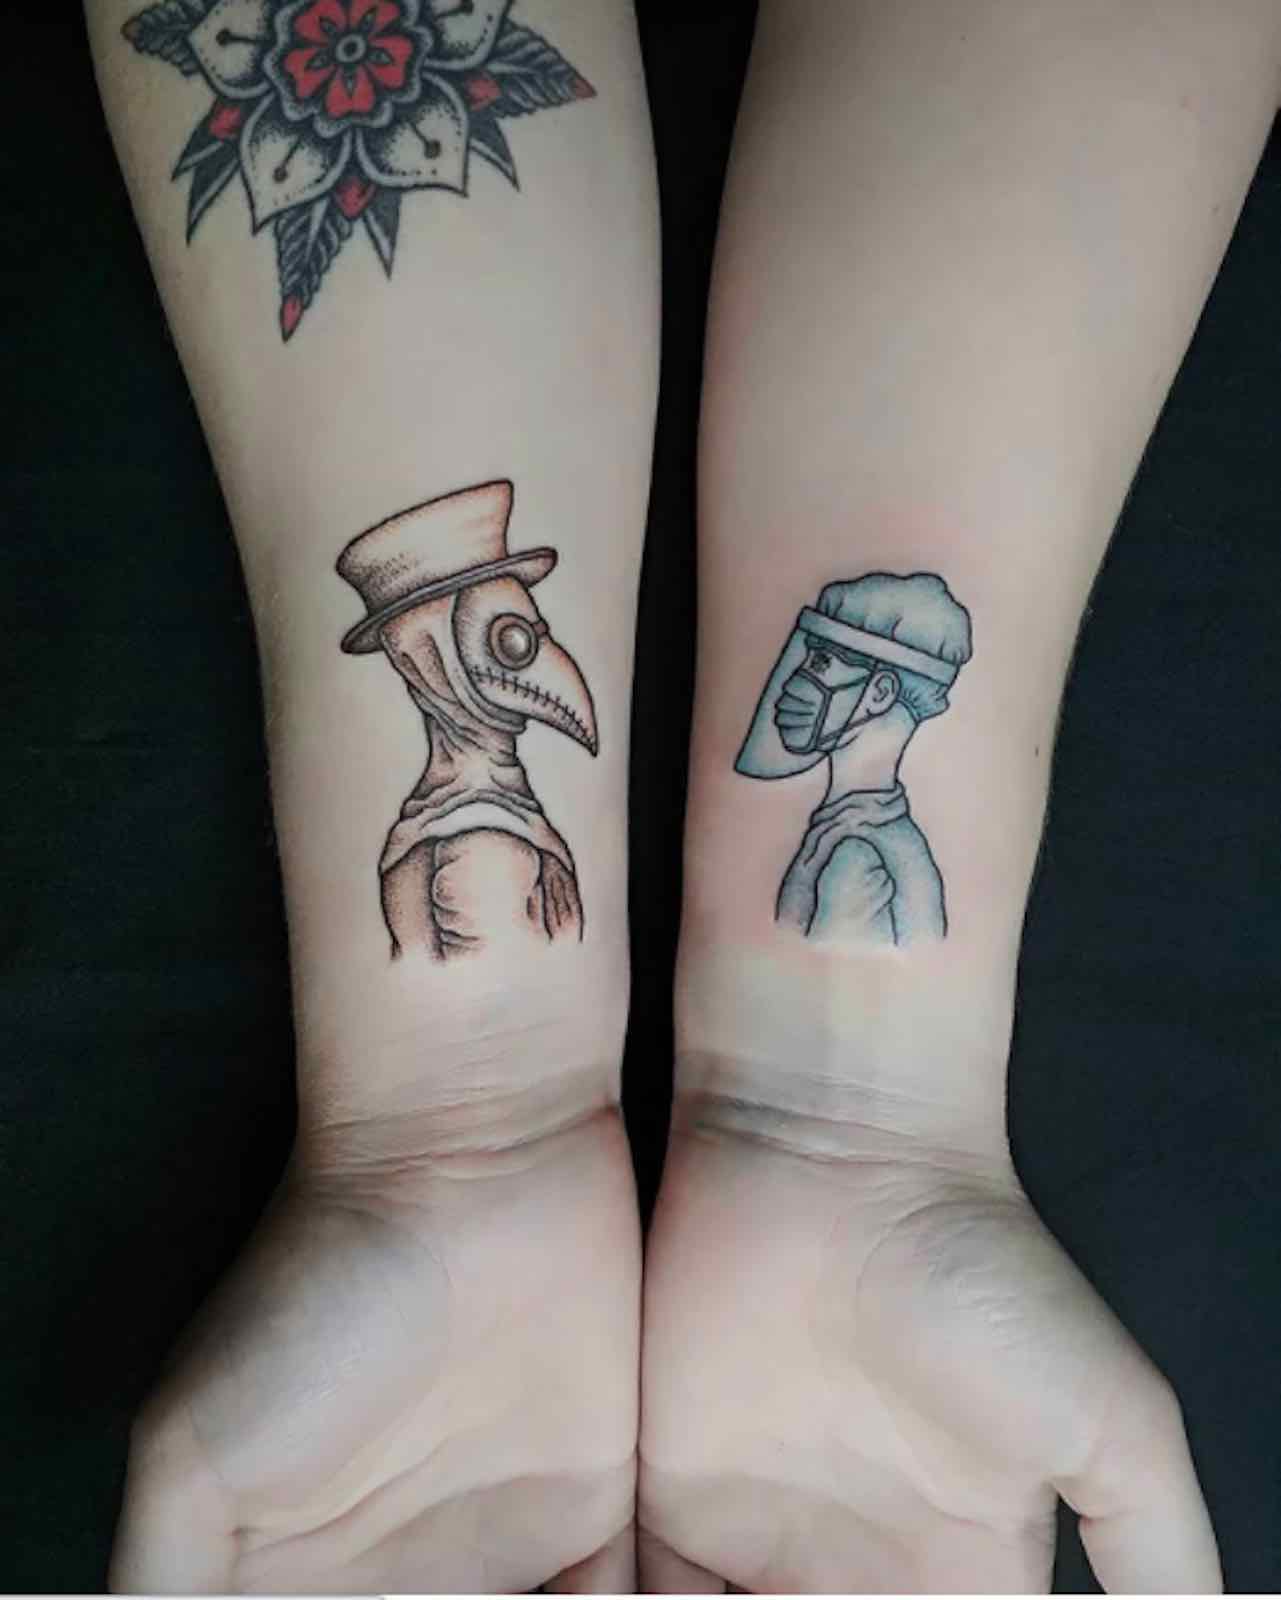 Mordecai and Rigby get tattoos by DollSizedHolly on DeviantArt